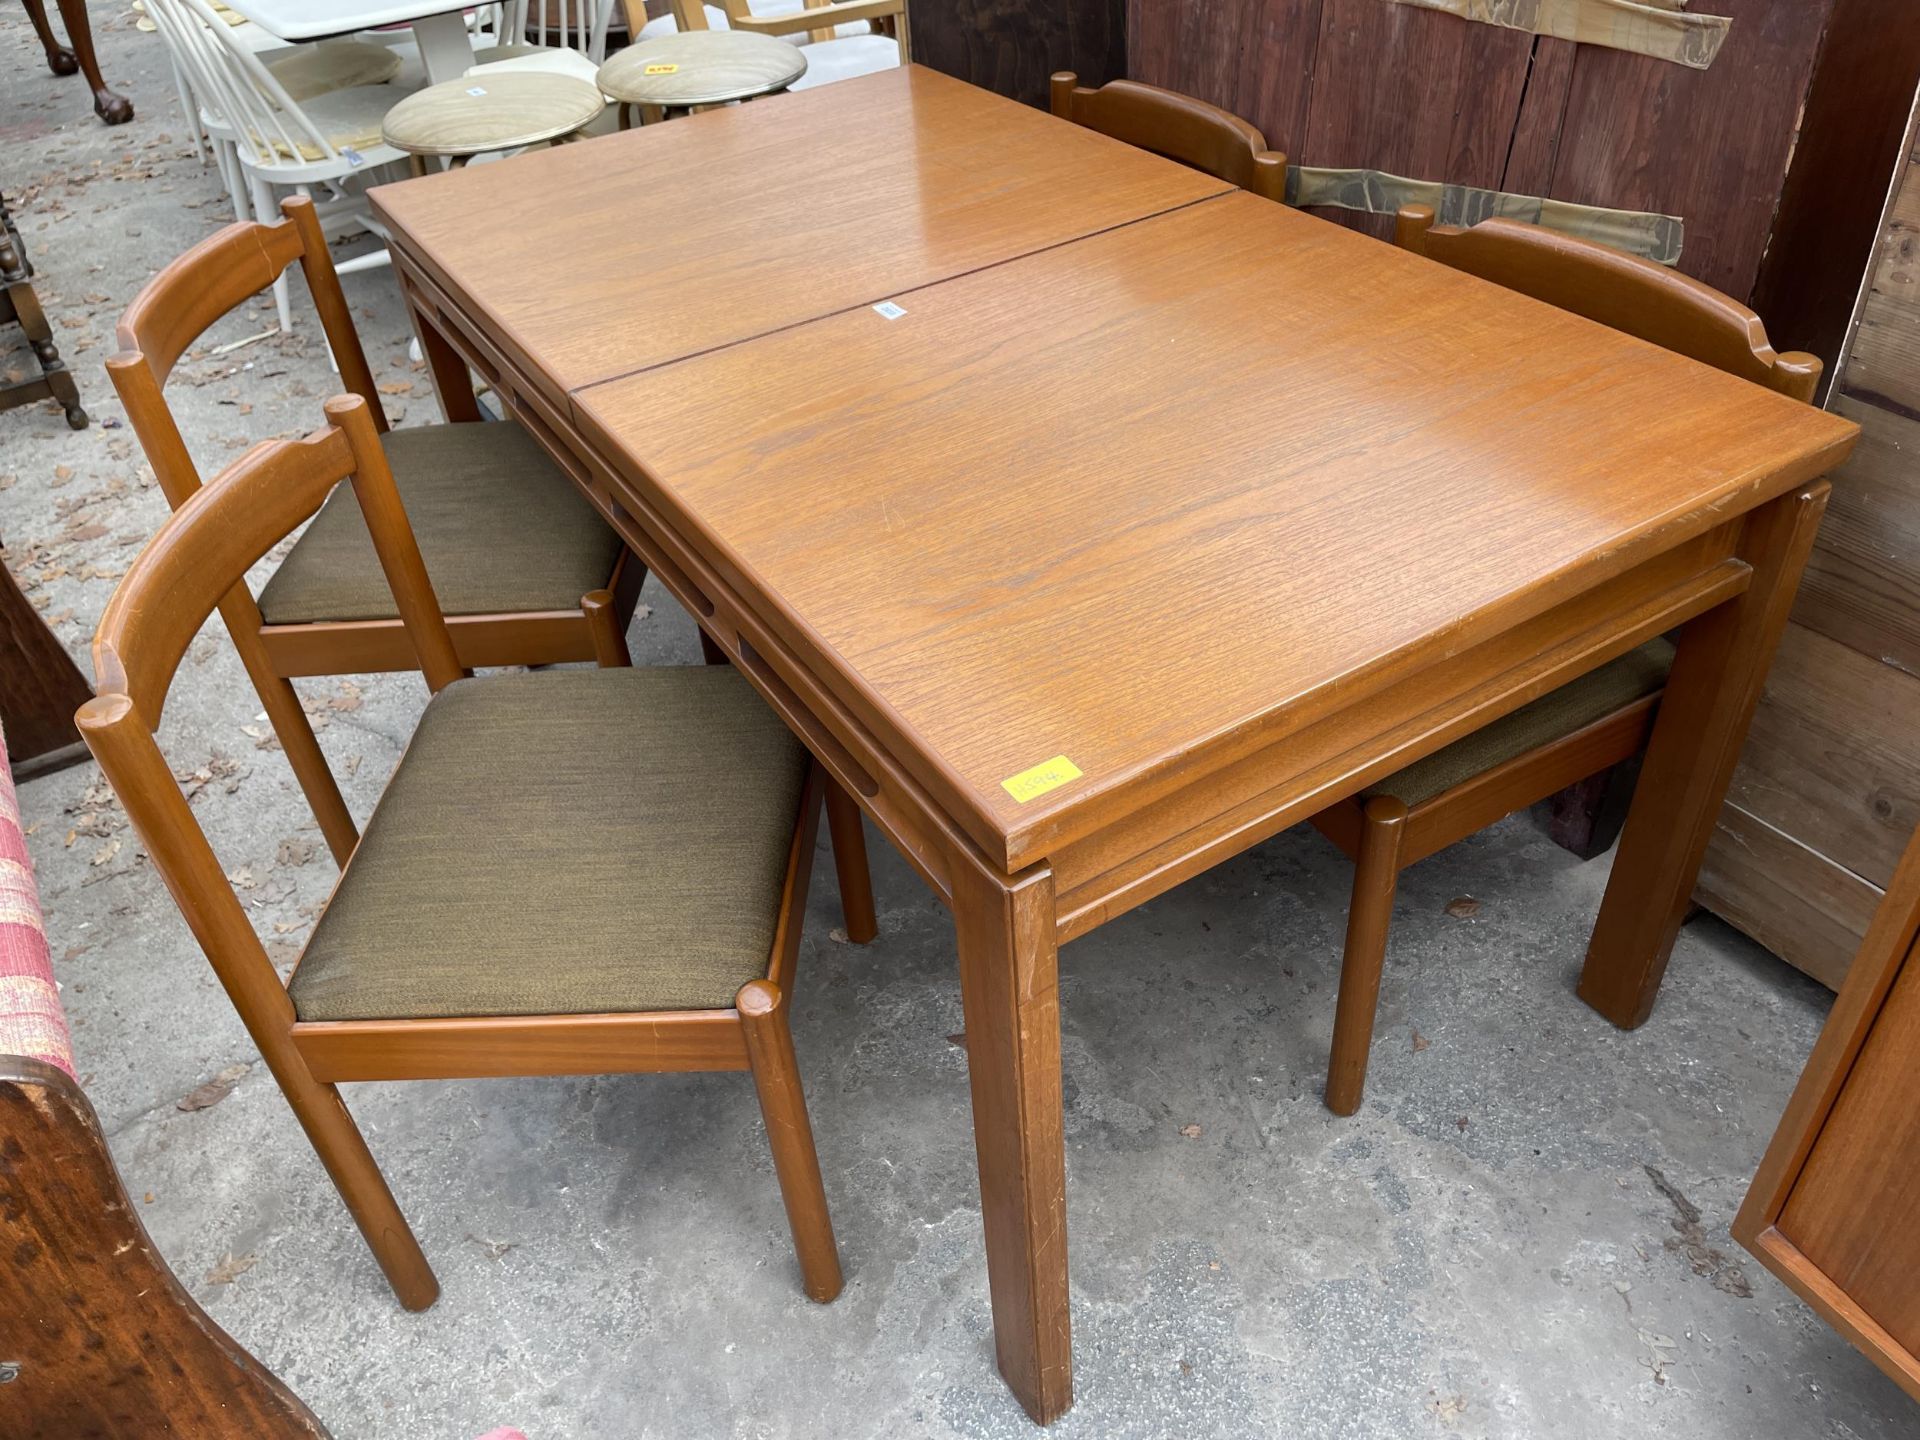 A RETRO TEAK EXTENDING DINING TABLE 60" X 33" (LEAF 18") AND FOUR DINING CHAIRS - Image 2 of 6